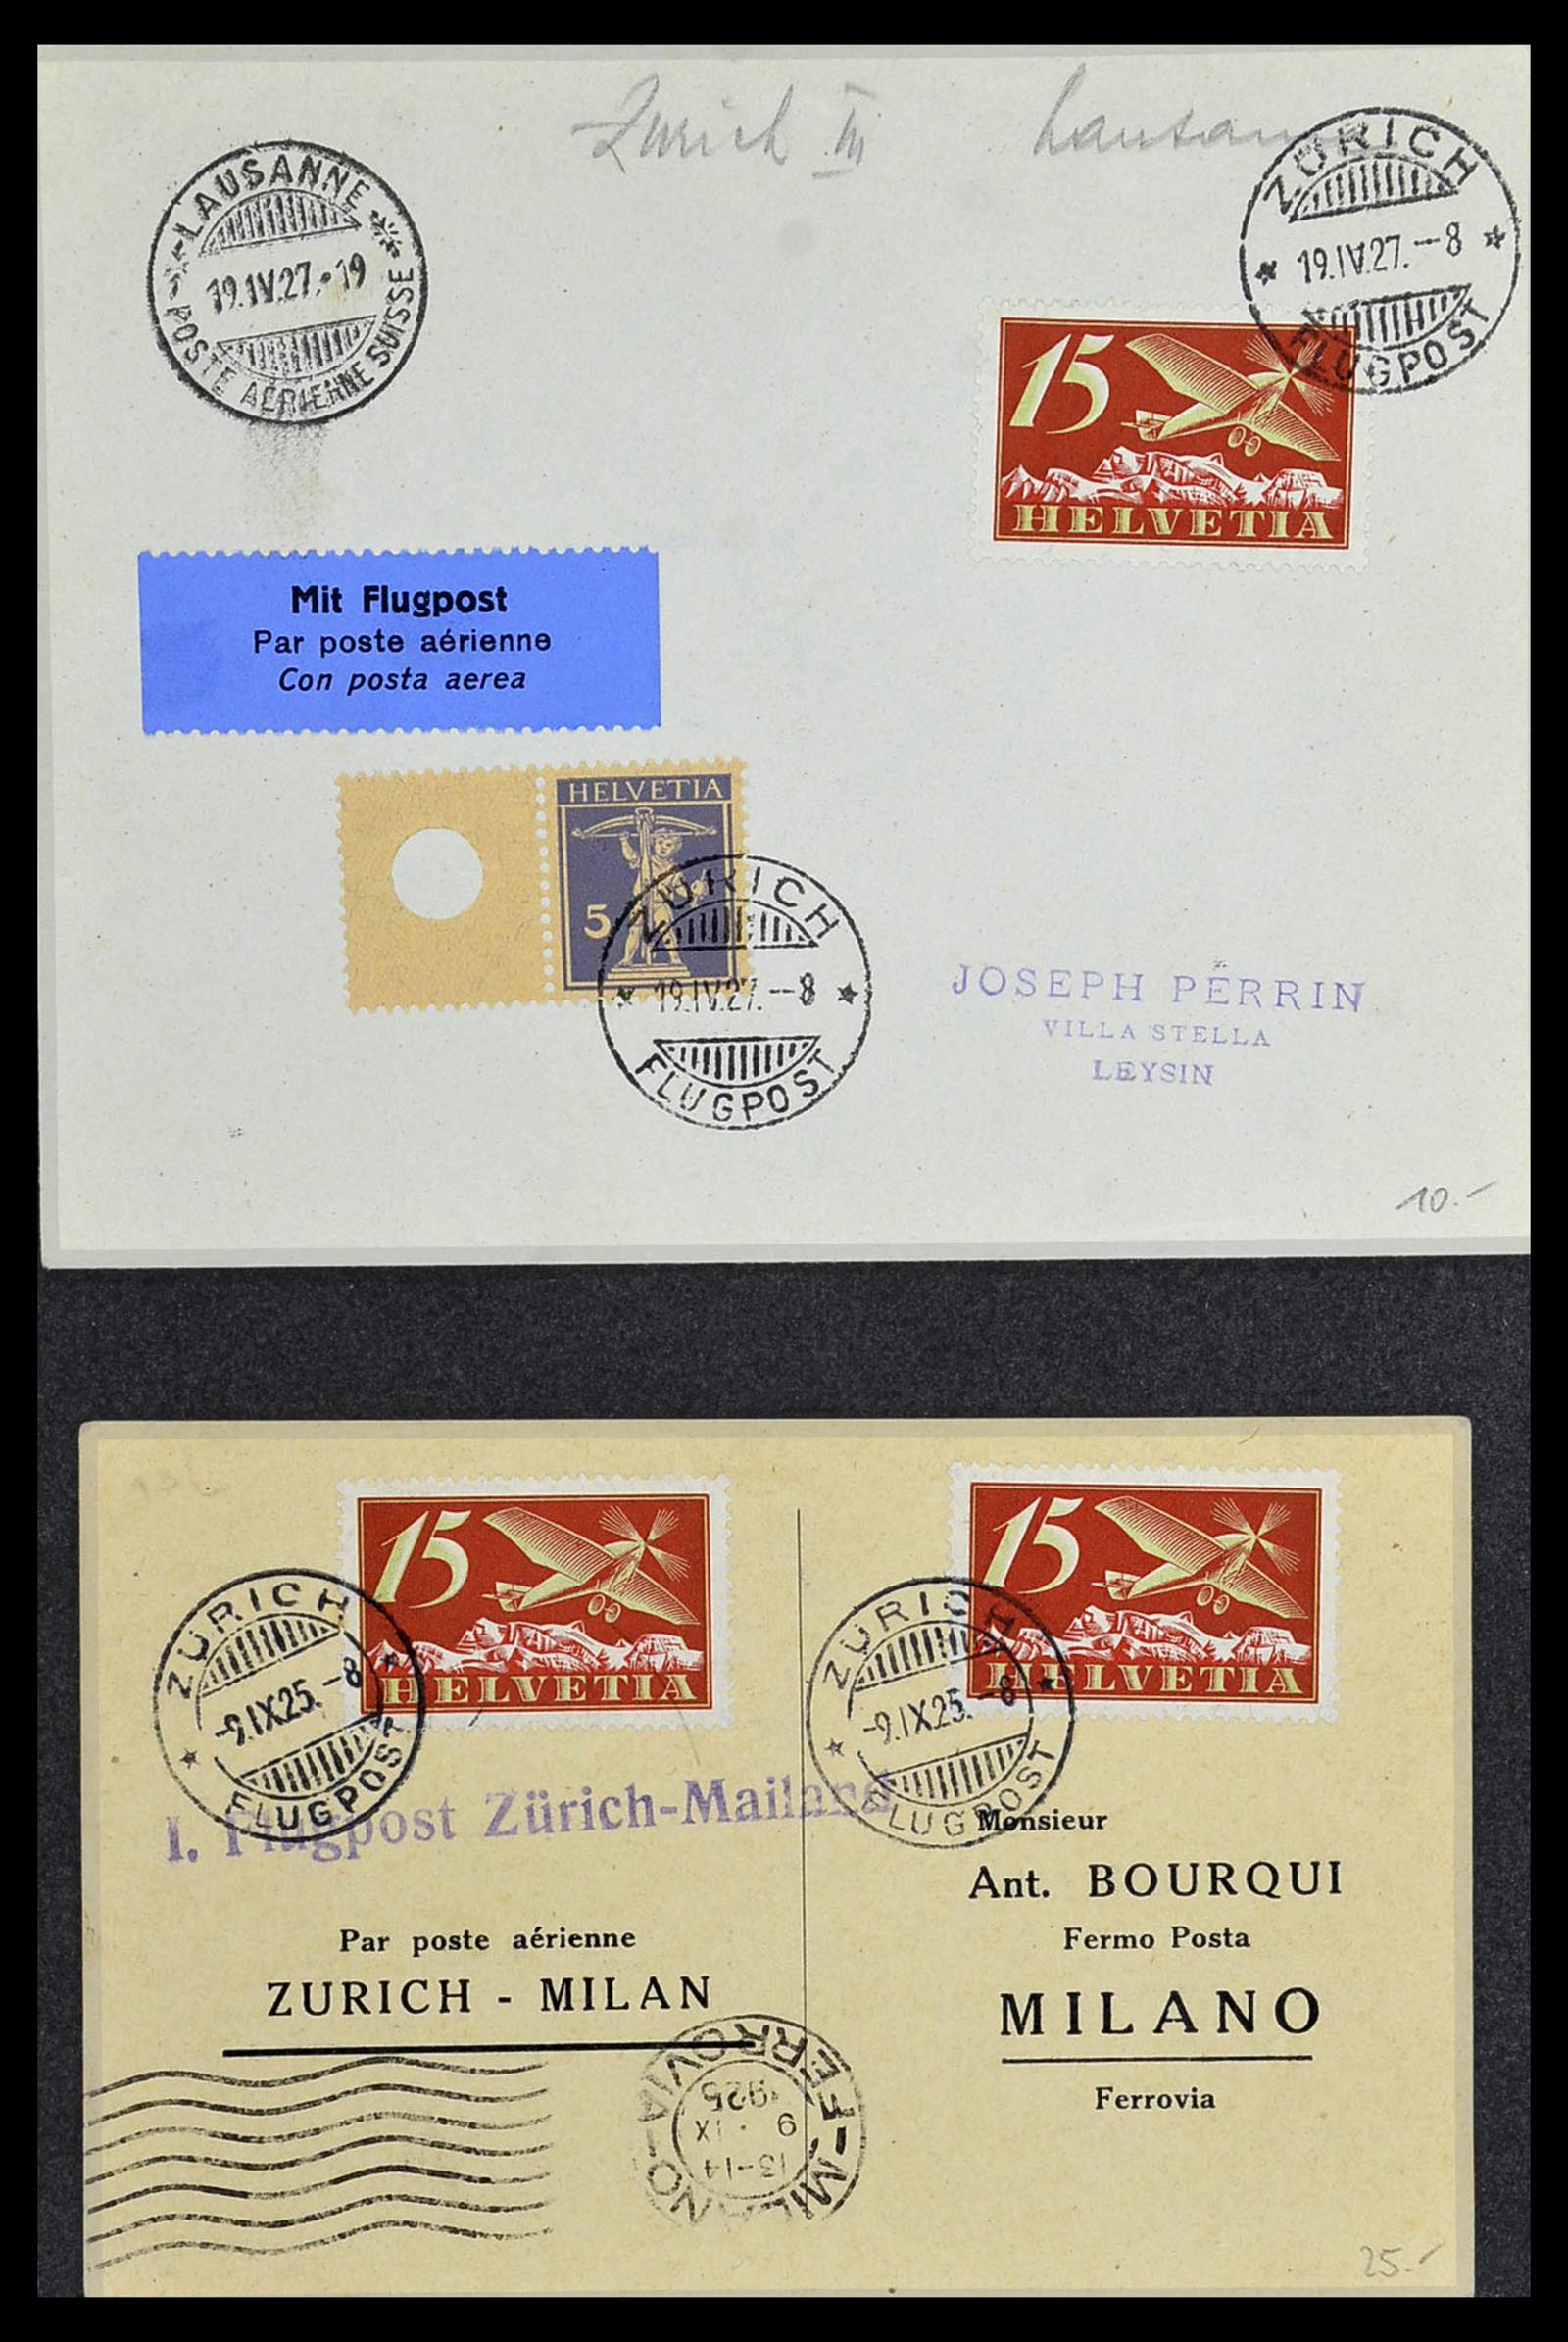 34141 106 - Stamp collection 34141 Switzerland airmail covers 1920-1960.